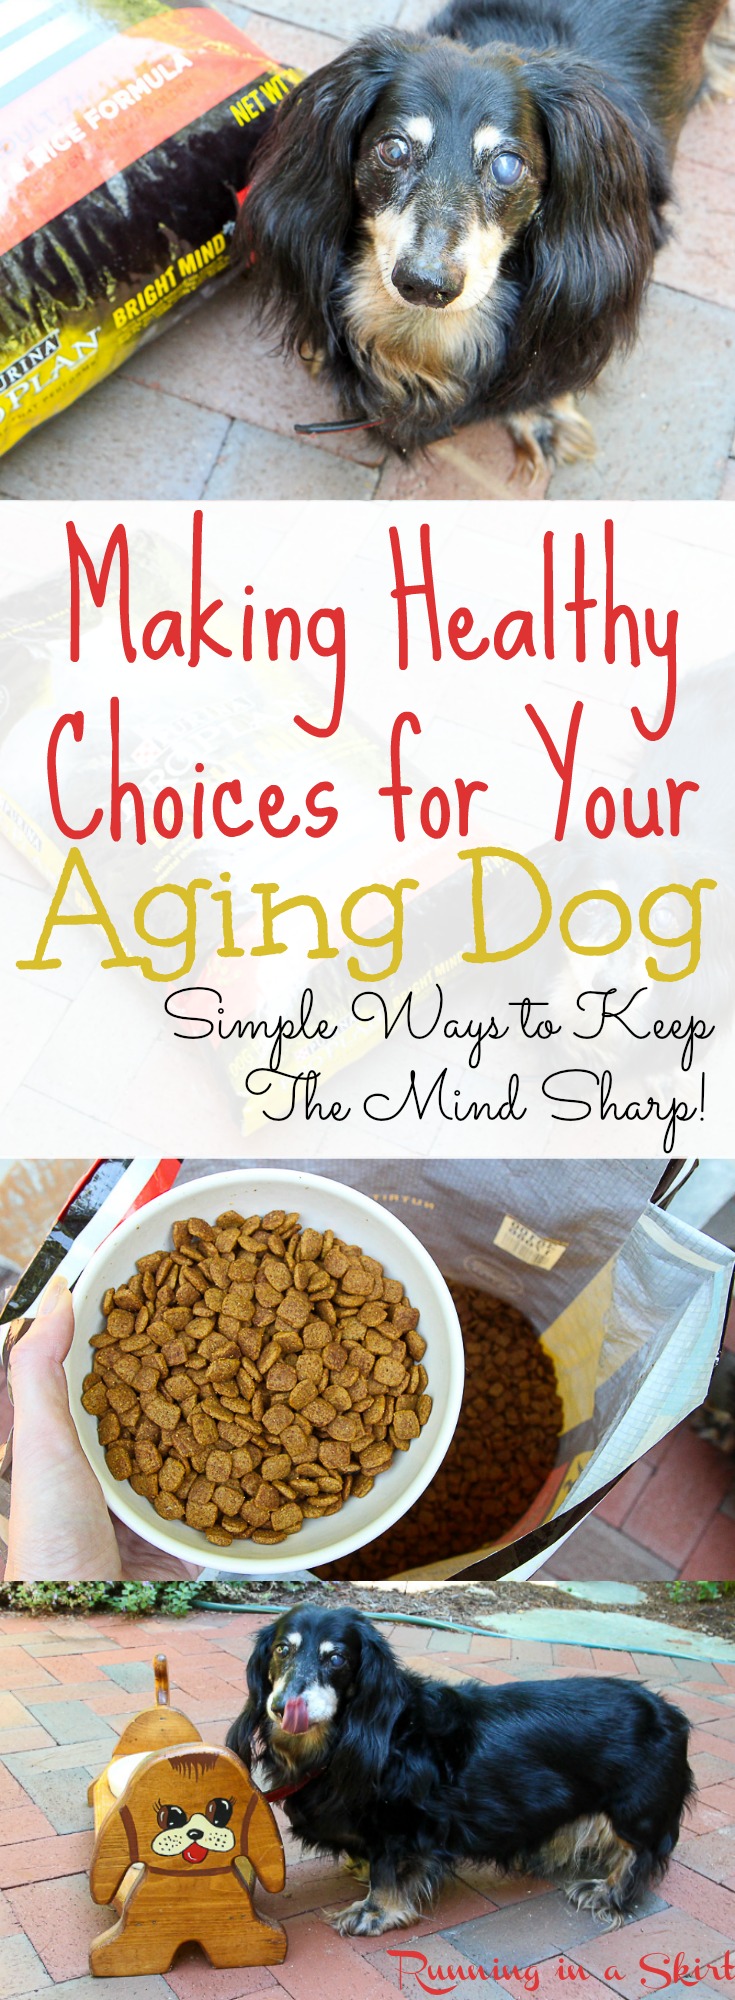 Healthy Choices for an Aging Dog